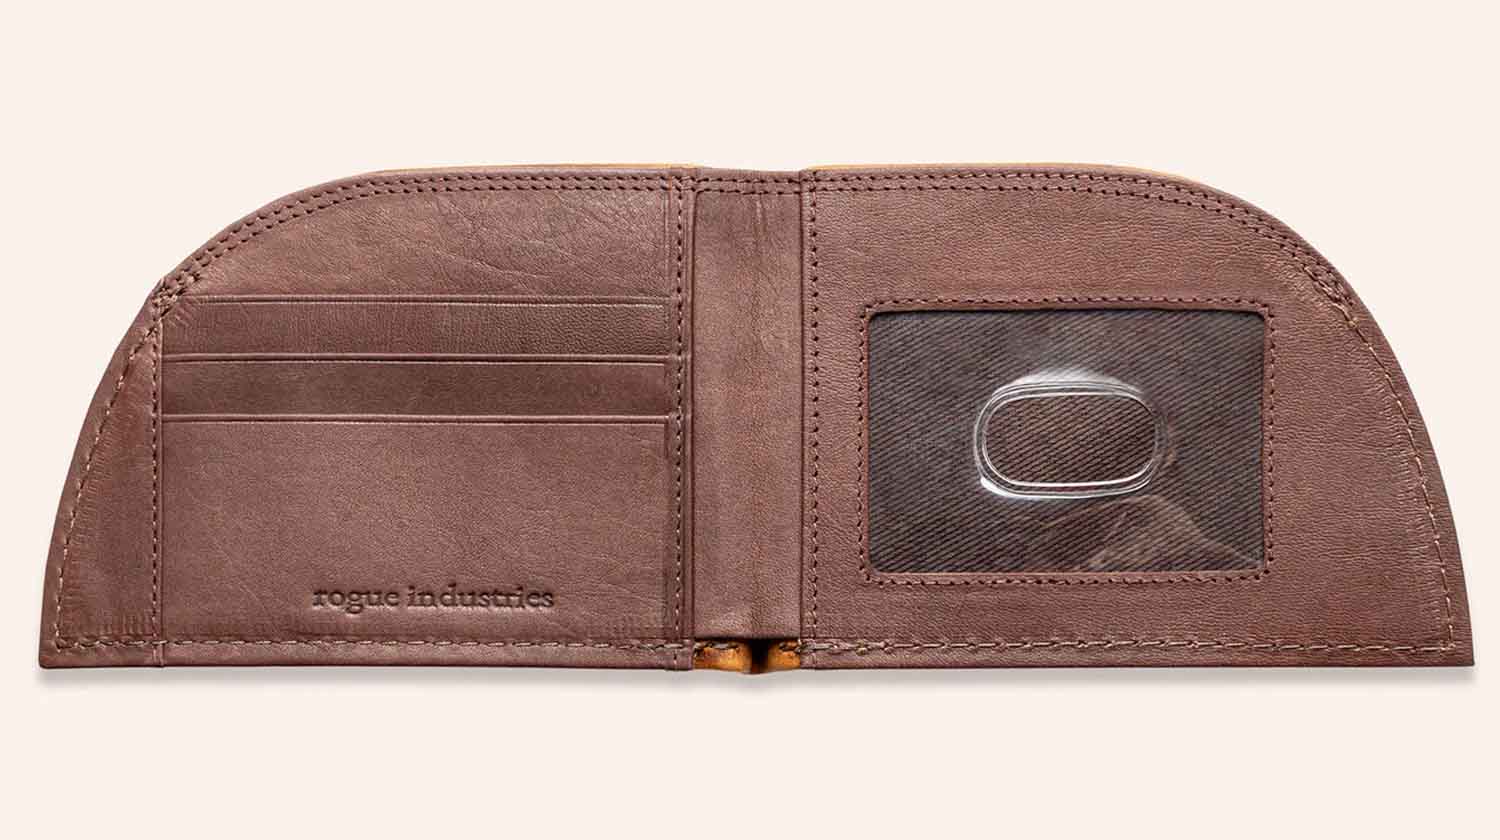 rogue industries american bison leather wallet